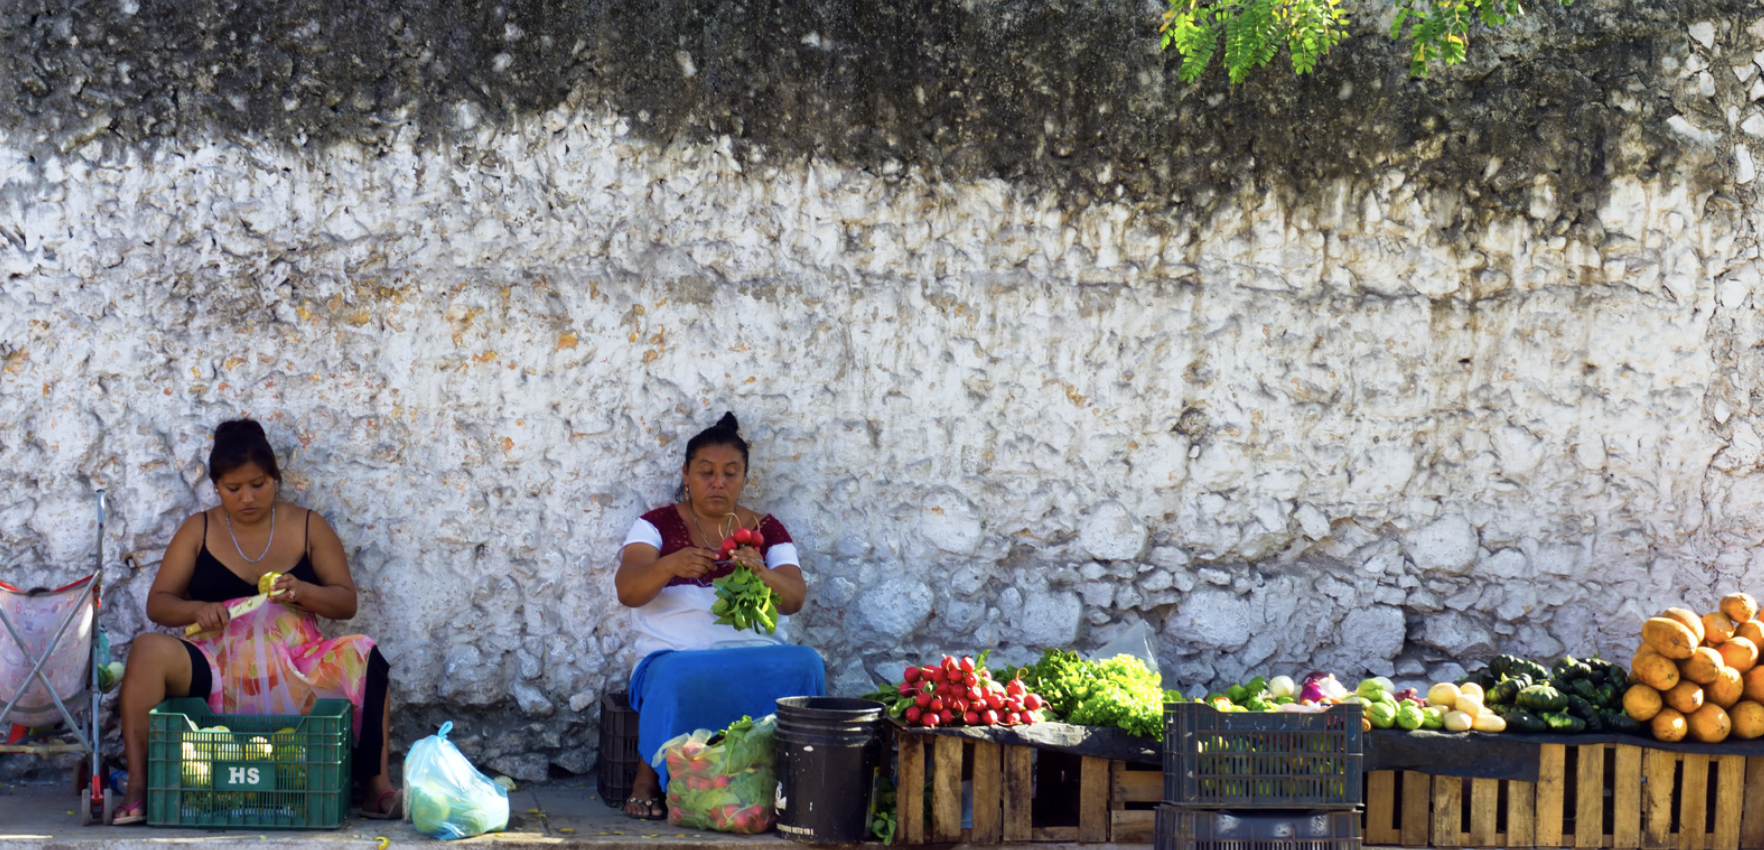 Women in Mexico at the market